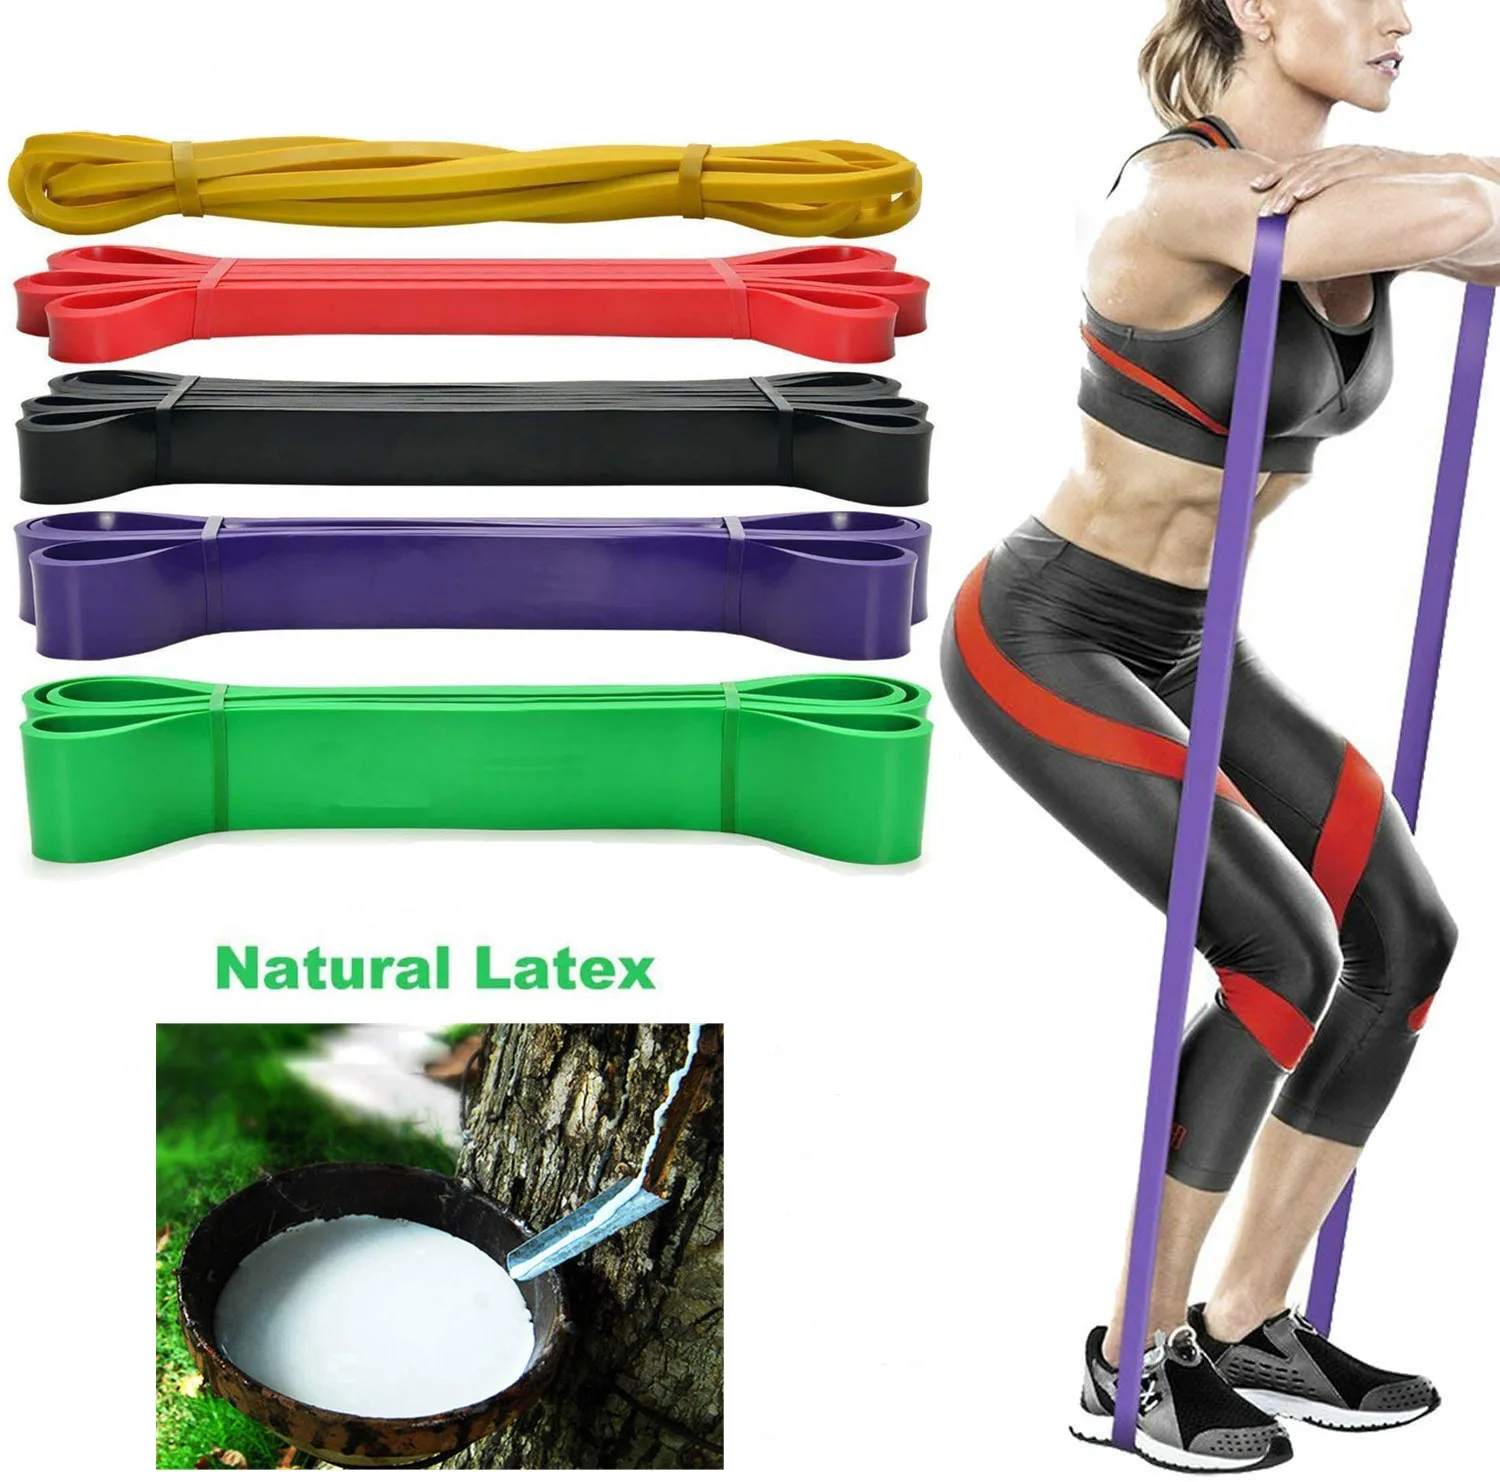 New Latex Resistance Bands Assisted Pull Up Power Exercise Stretching Yoga Gym 